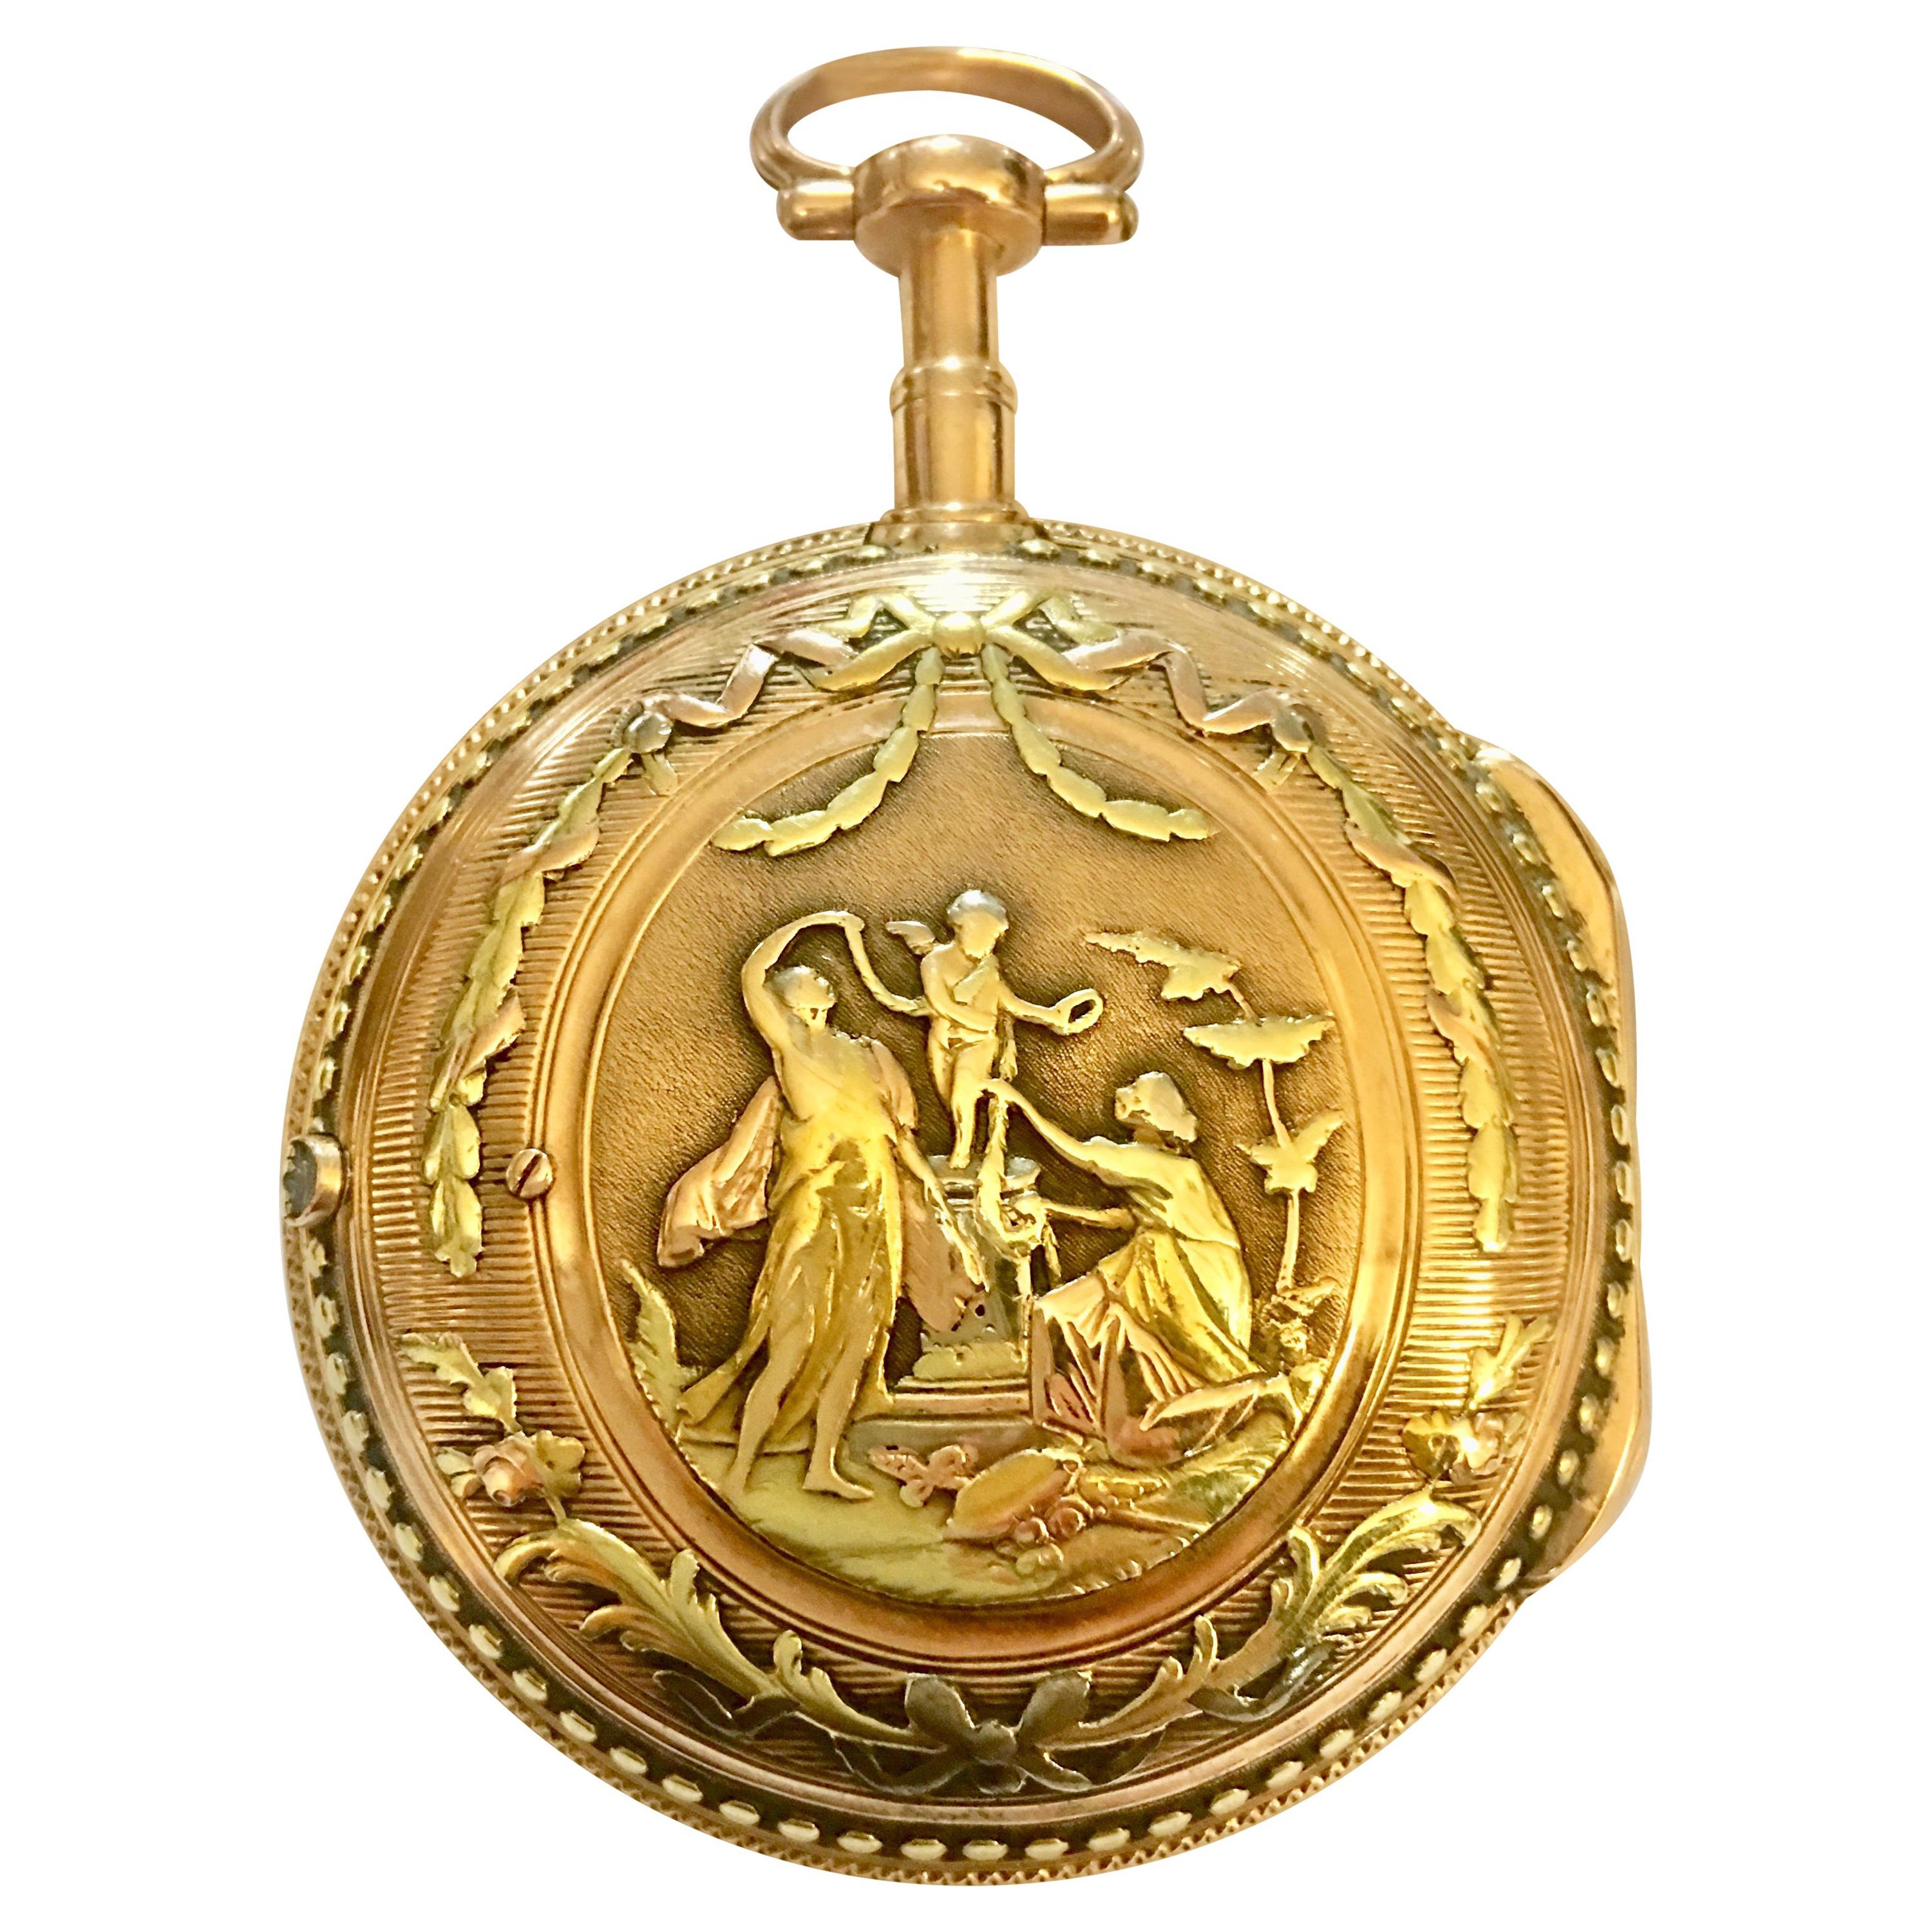 Rare & Early Verge Fusee 18 Karat Tri-Color Gold Pocket Watch by Mallet a Paris For Sale